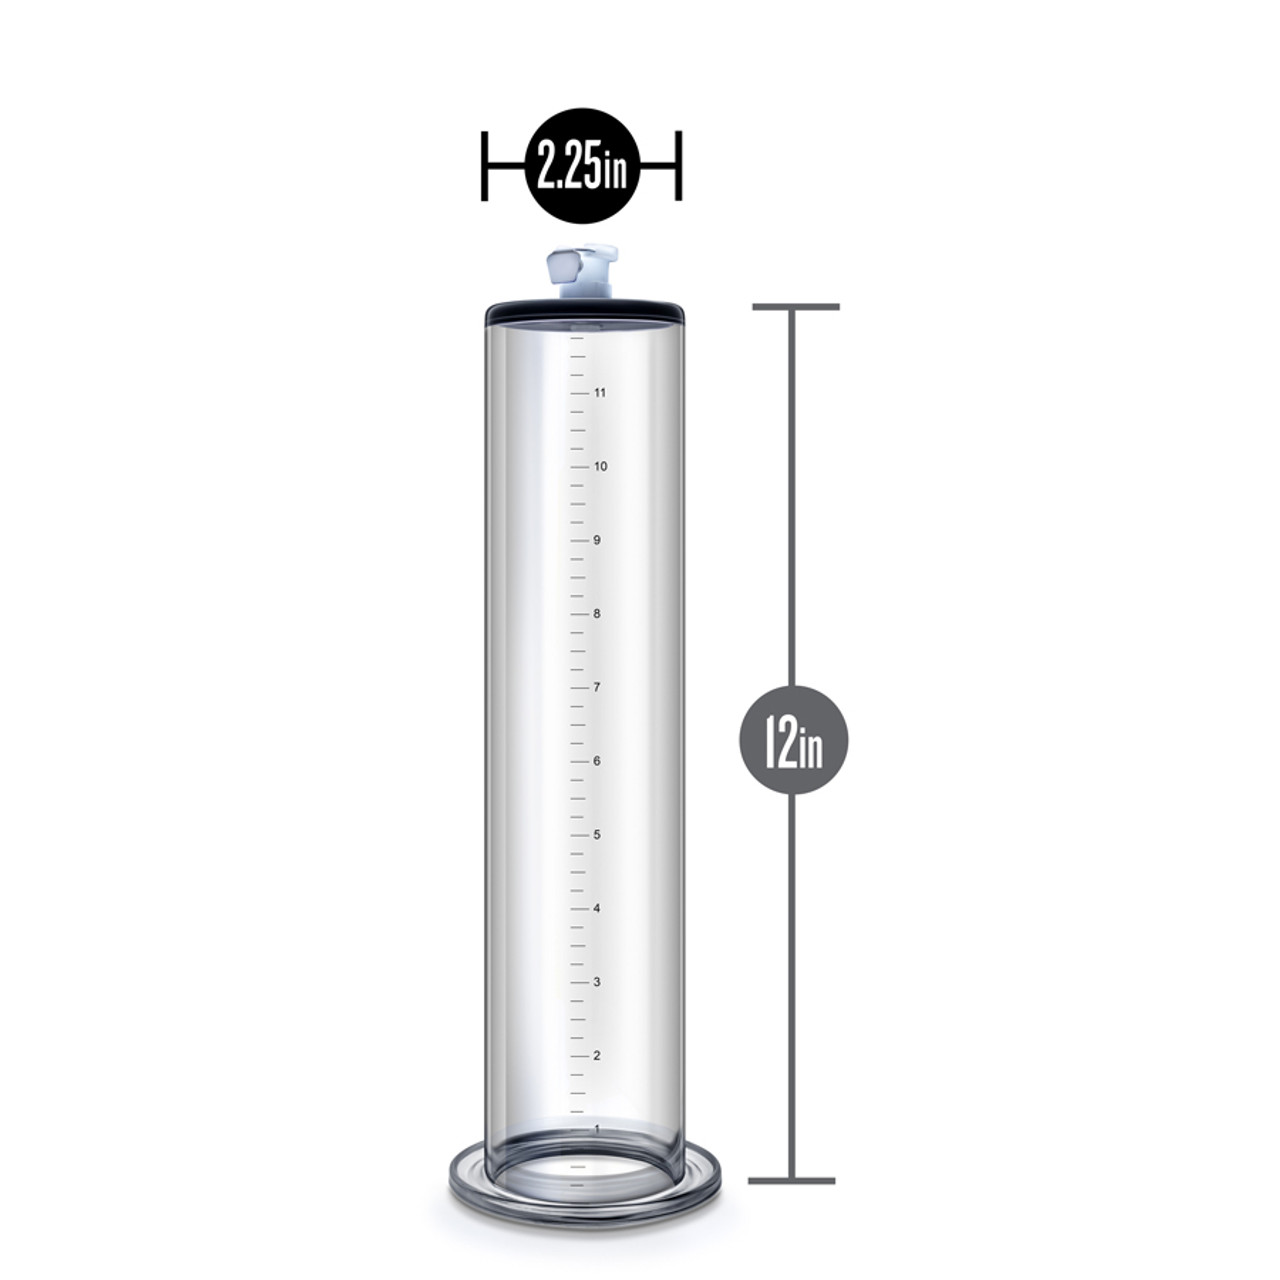 Buy the Performance 12 inch by 2.5 inch Vacuum Penis Pump Cylinder